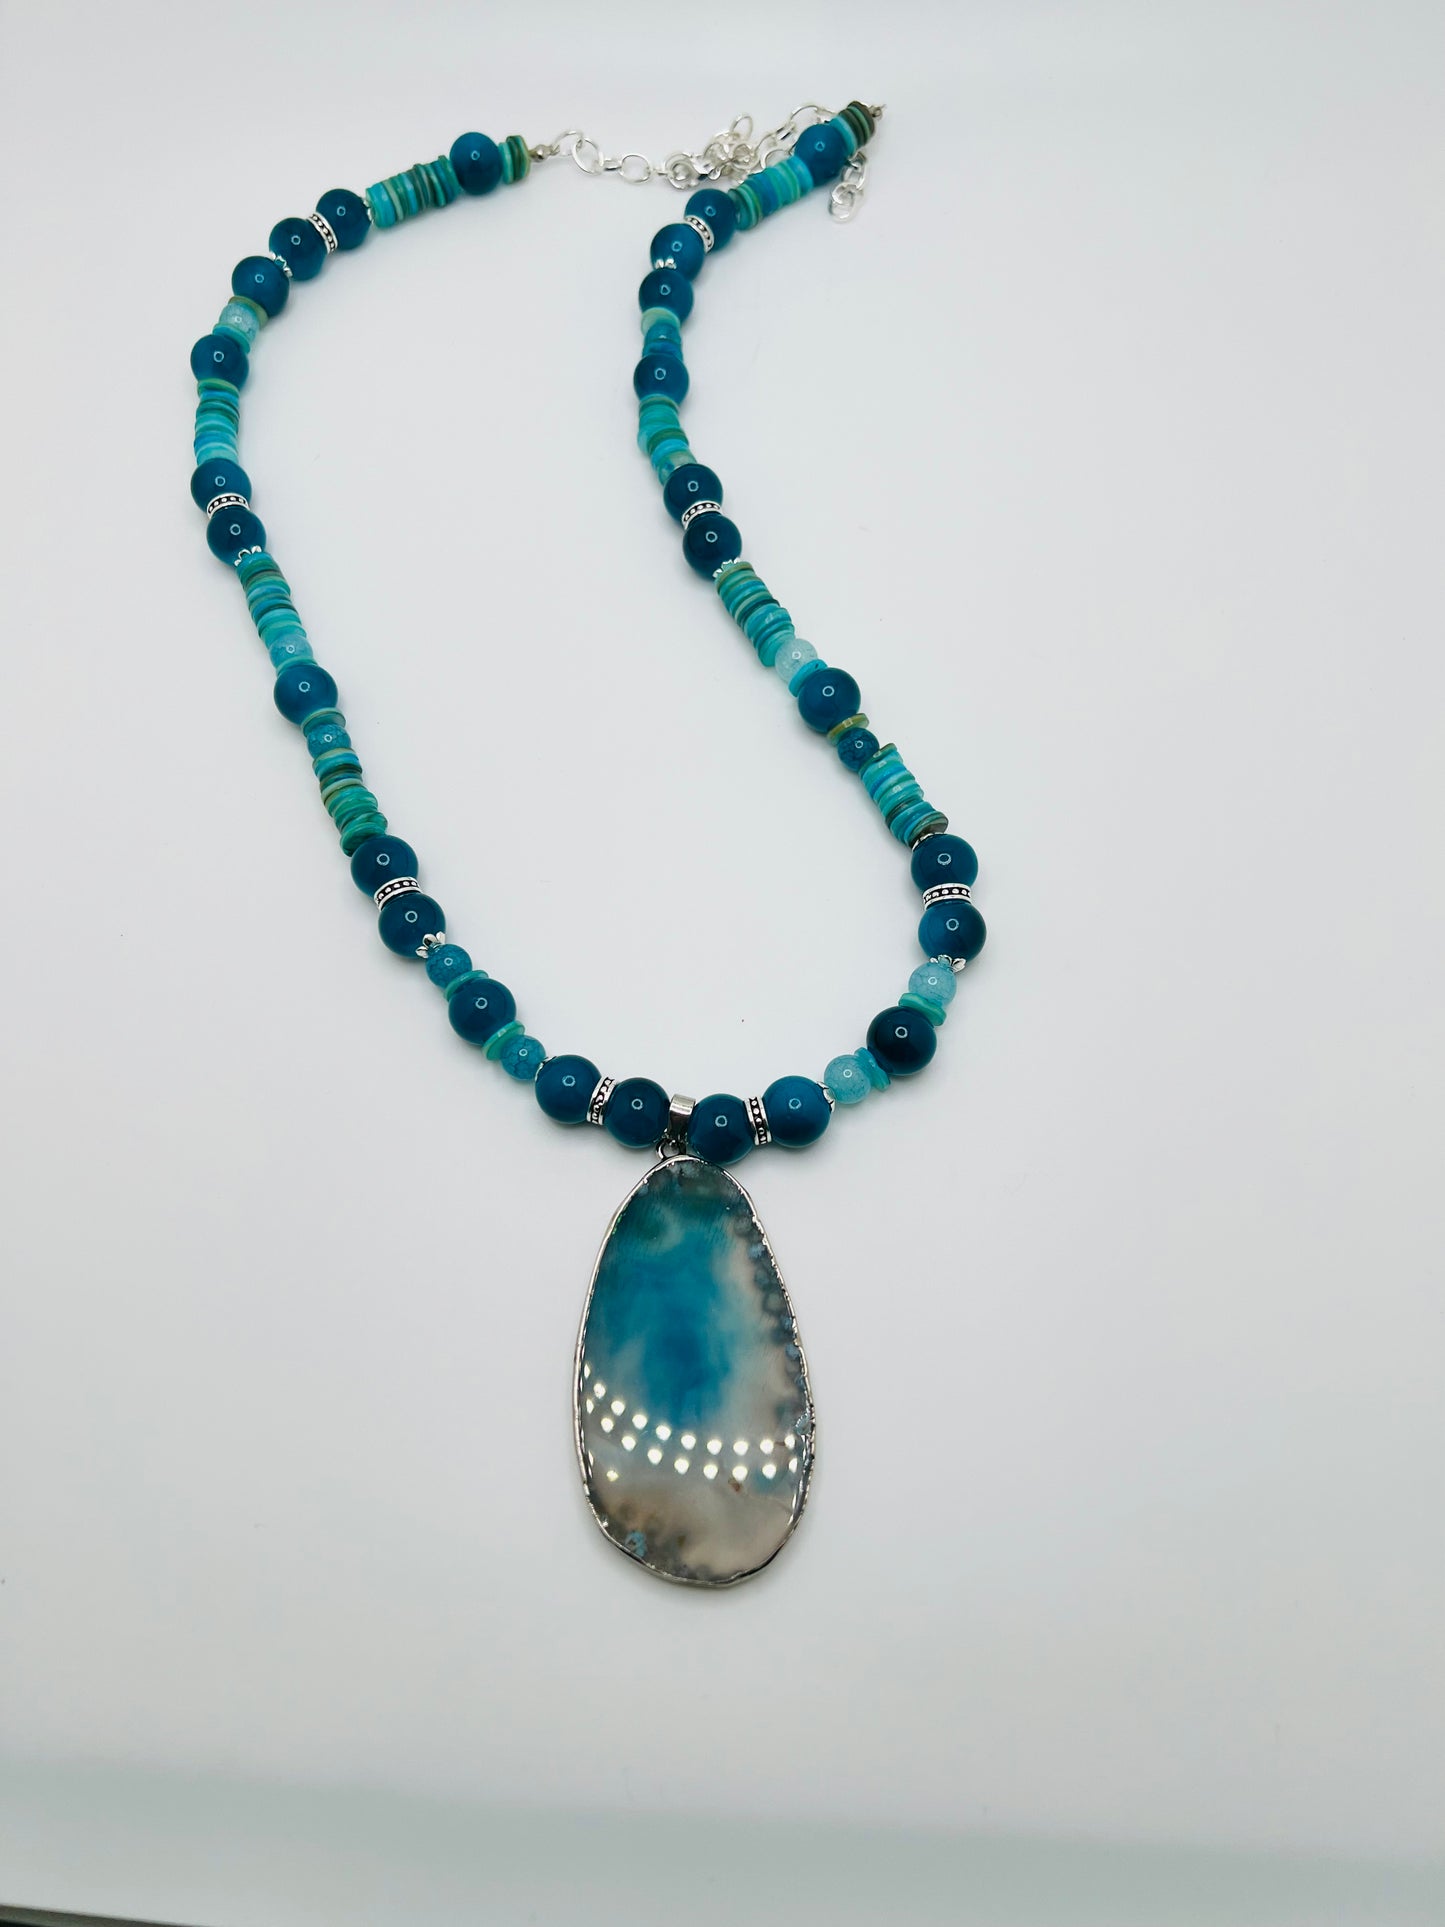 Natural Turquoise/Teal Gemstone Necklace with Agate Pendant